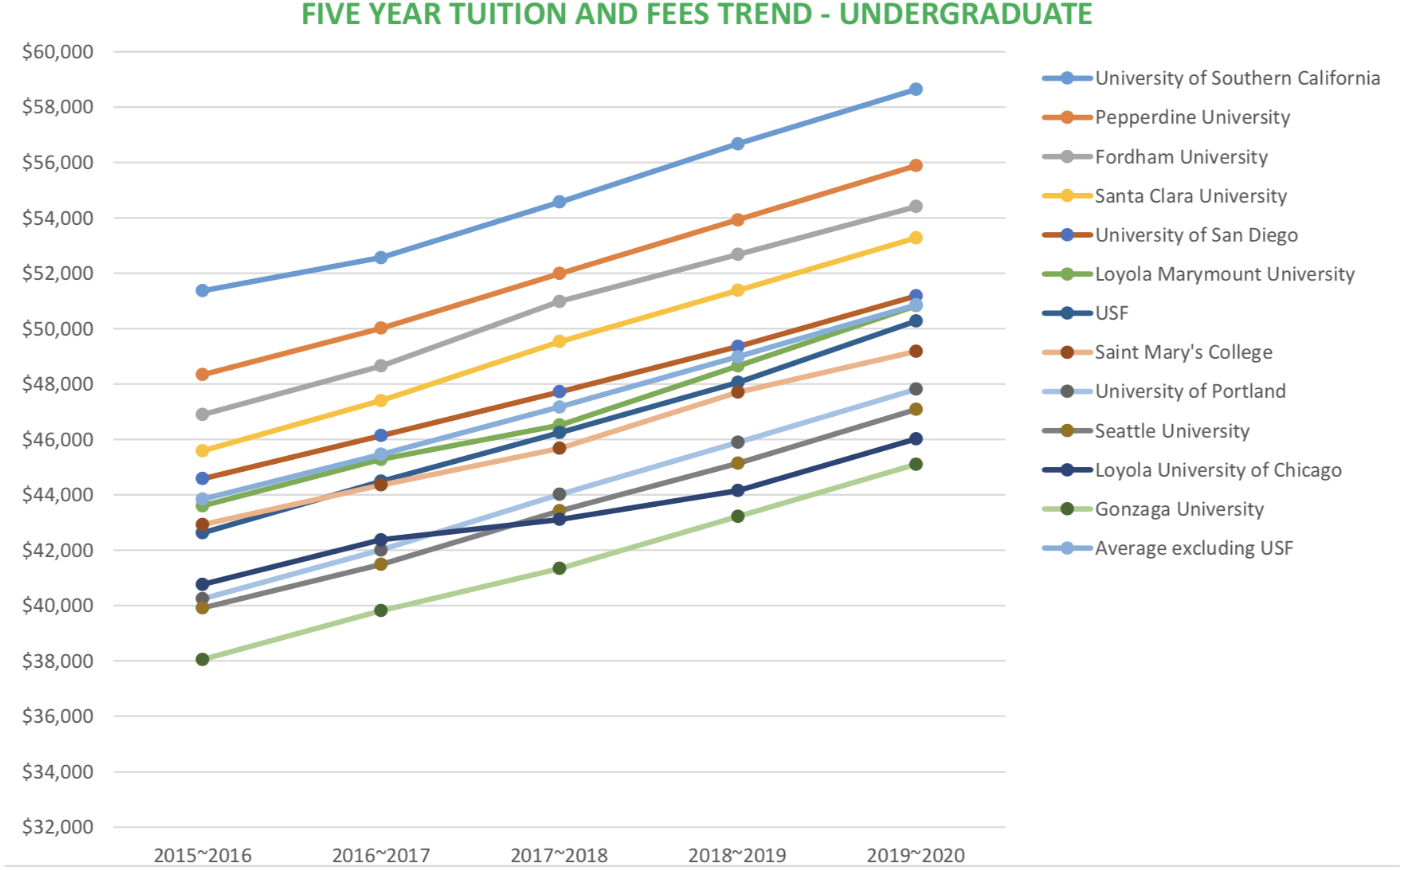 How do our tuition levels compare?